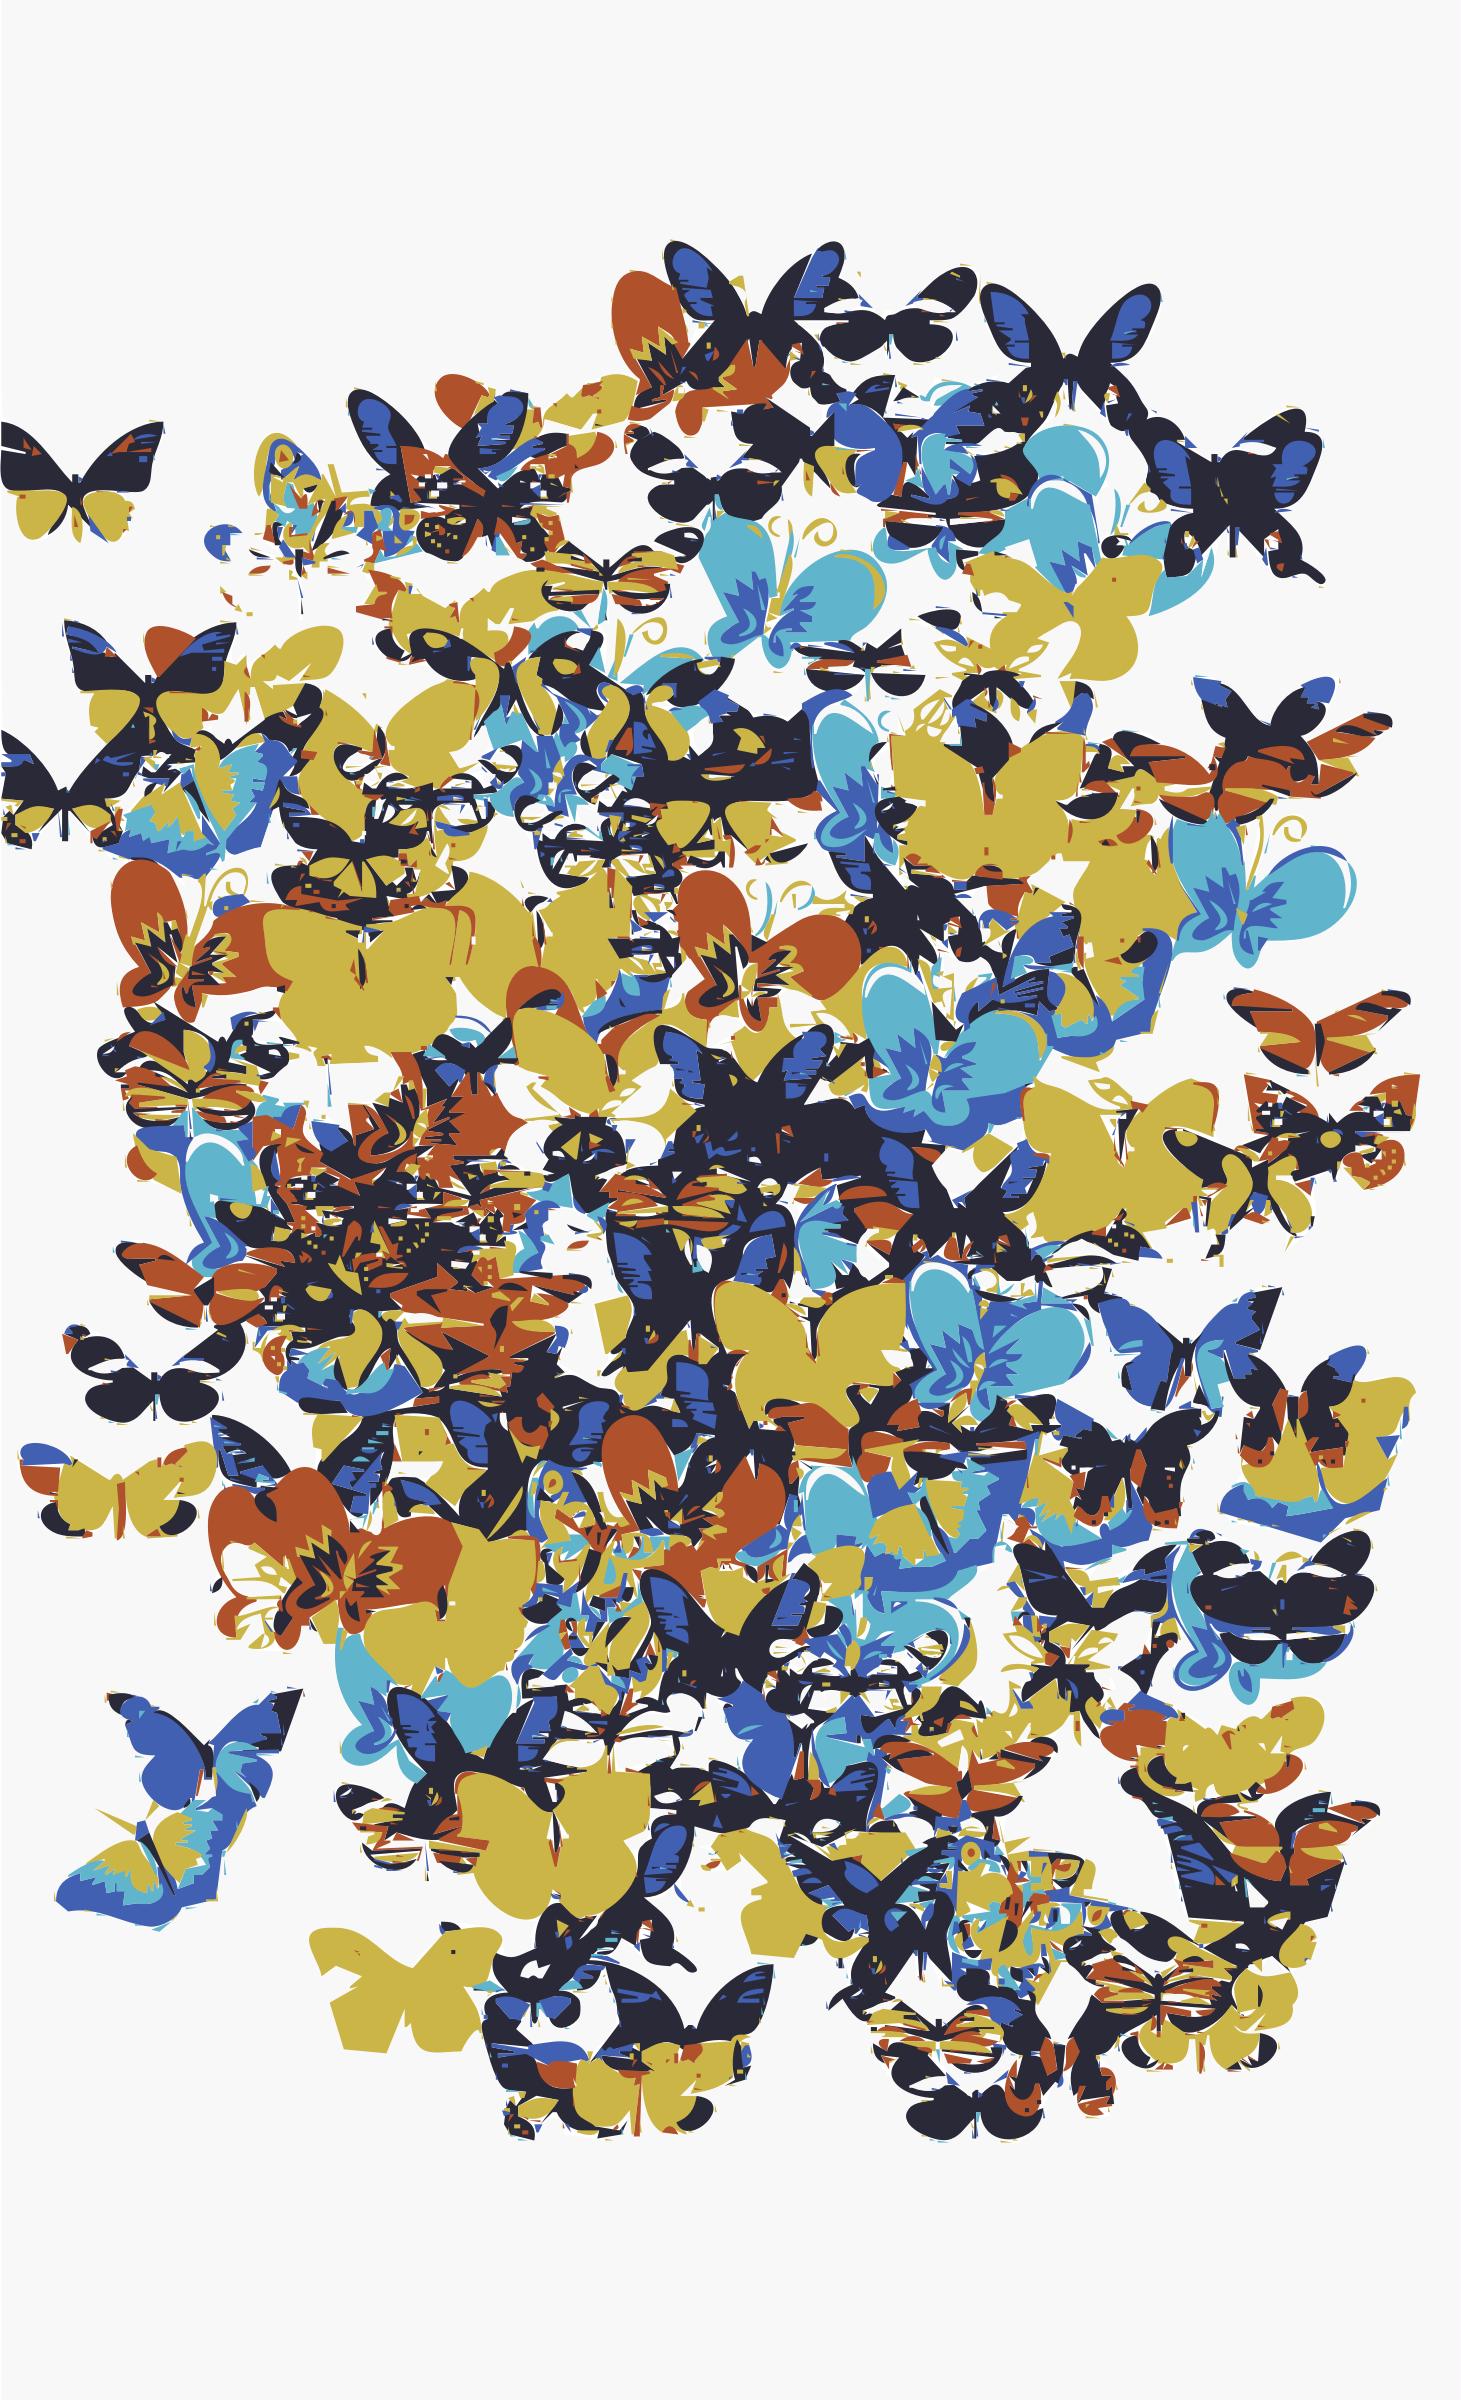 A swarm of butterflies png